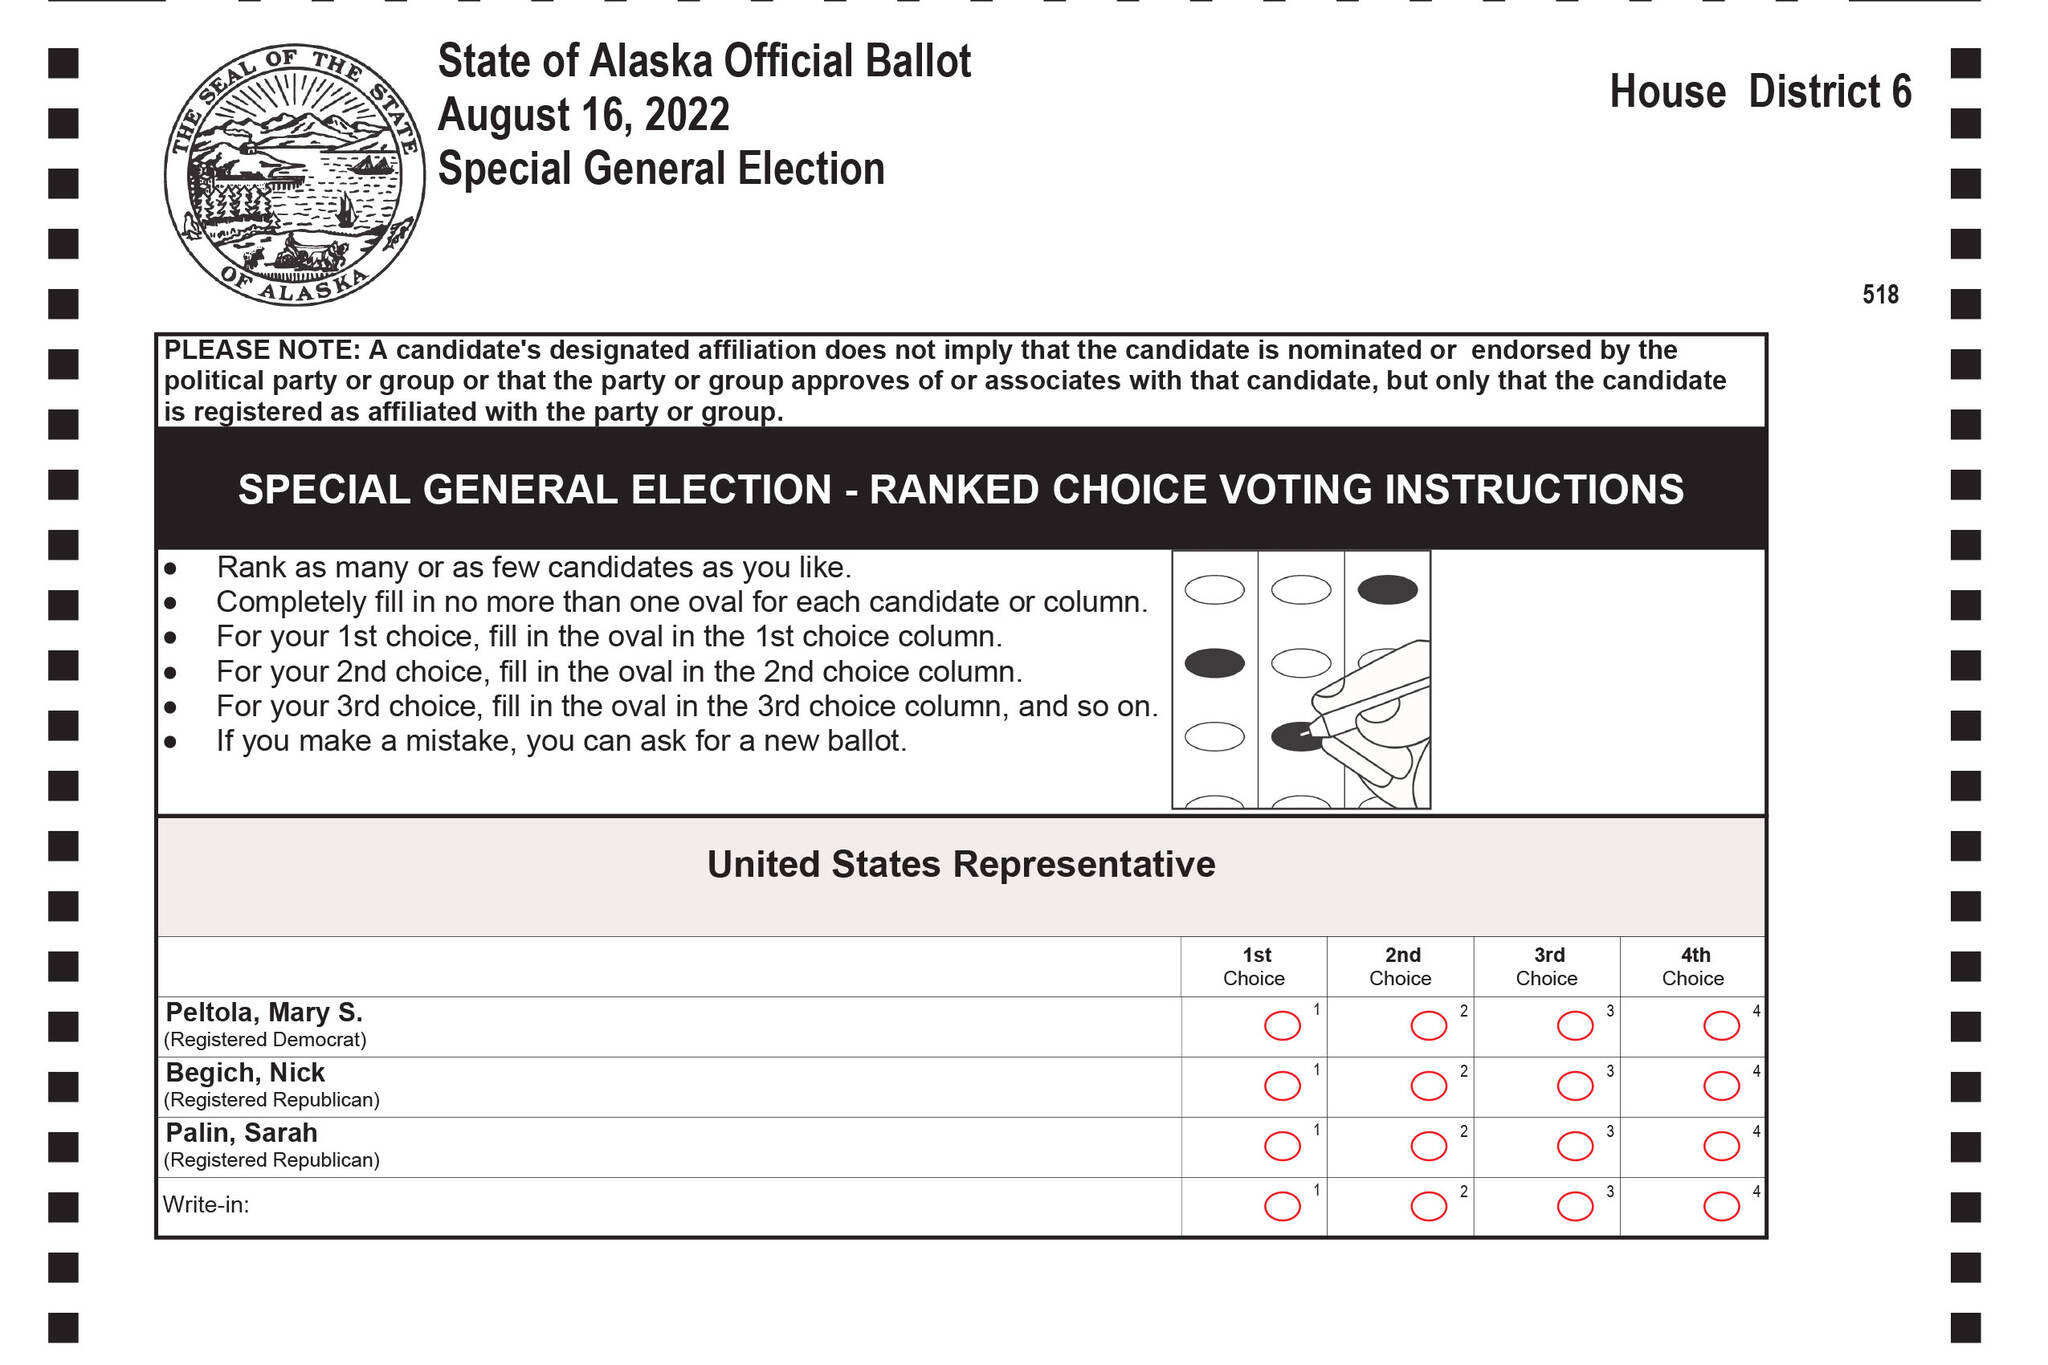 The offical ballot for the Aug. 16, 2022, Special General Election features ranked choice voting. (State of Alaska Divison of Elections)